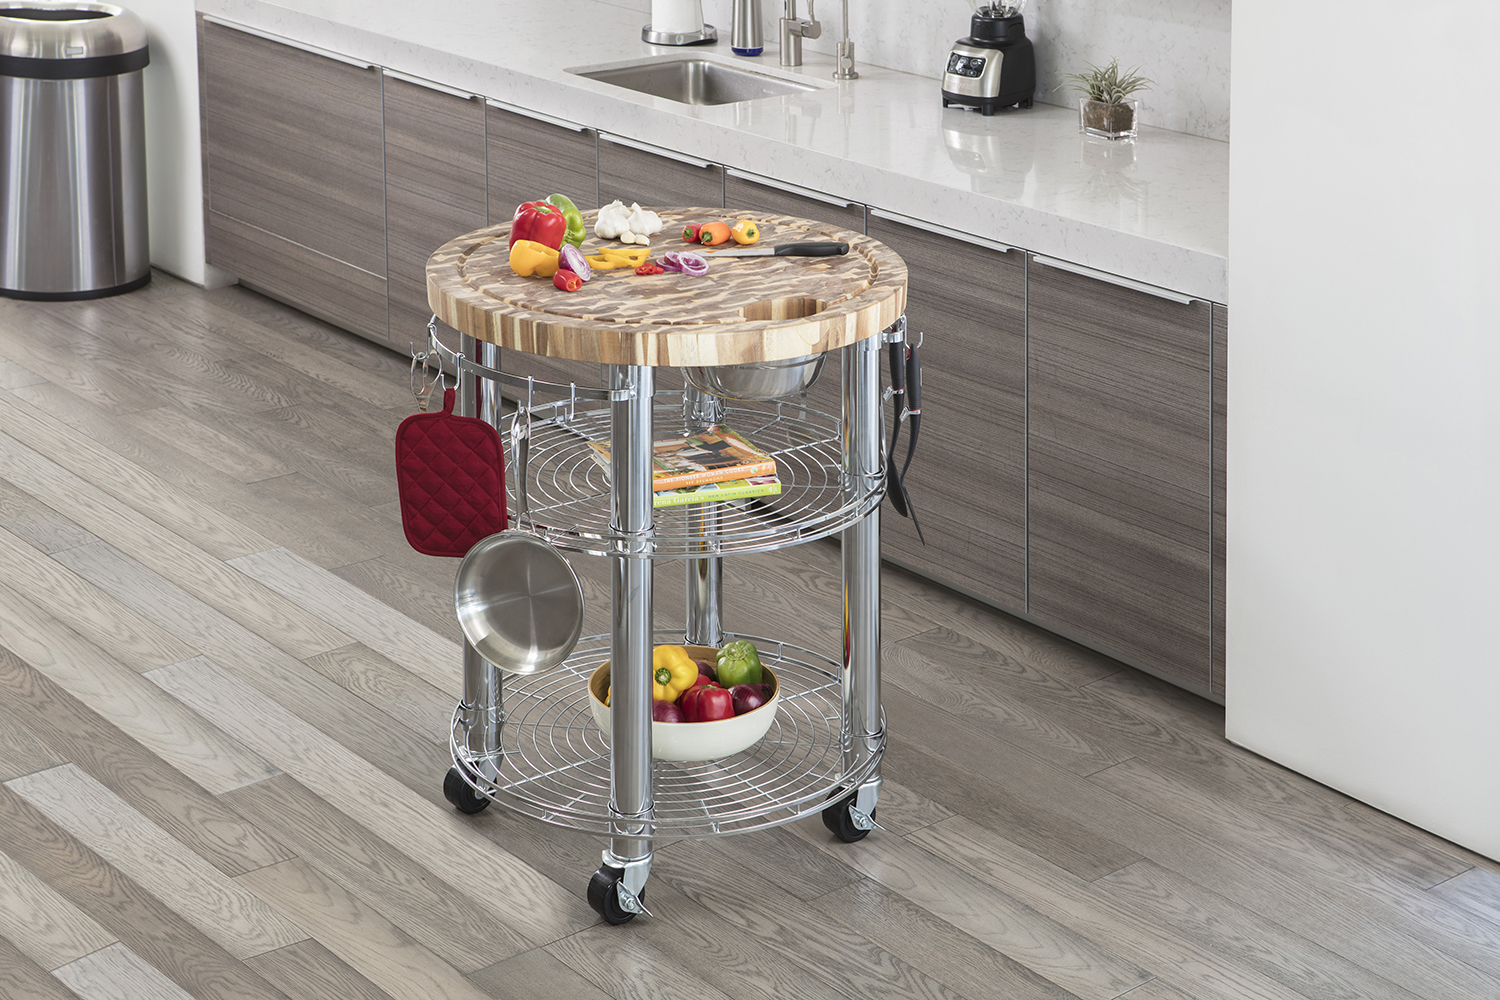 Seville Classics Rolling Butcher Block Top Kitchen Island Cart with Storage, 30 in Diameter x 36 in H - image 4 of 6